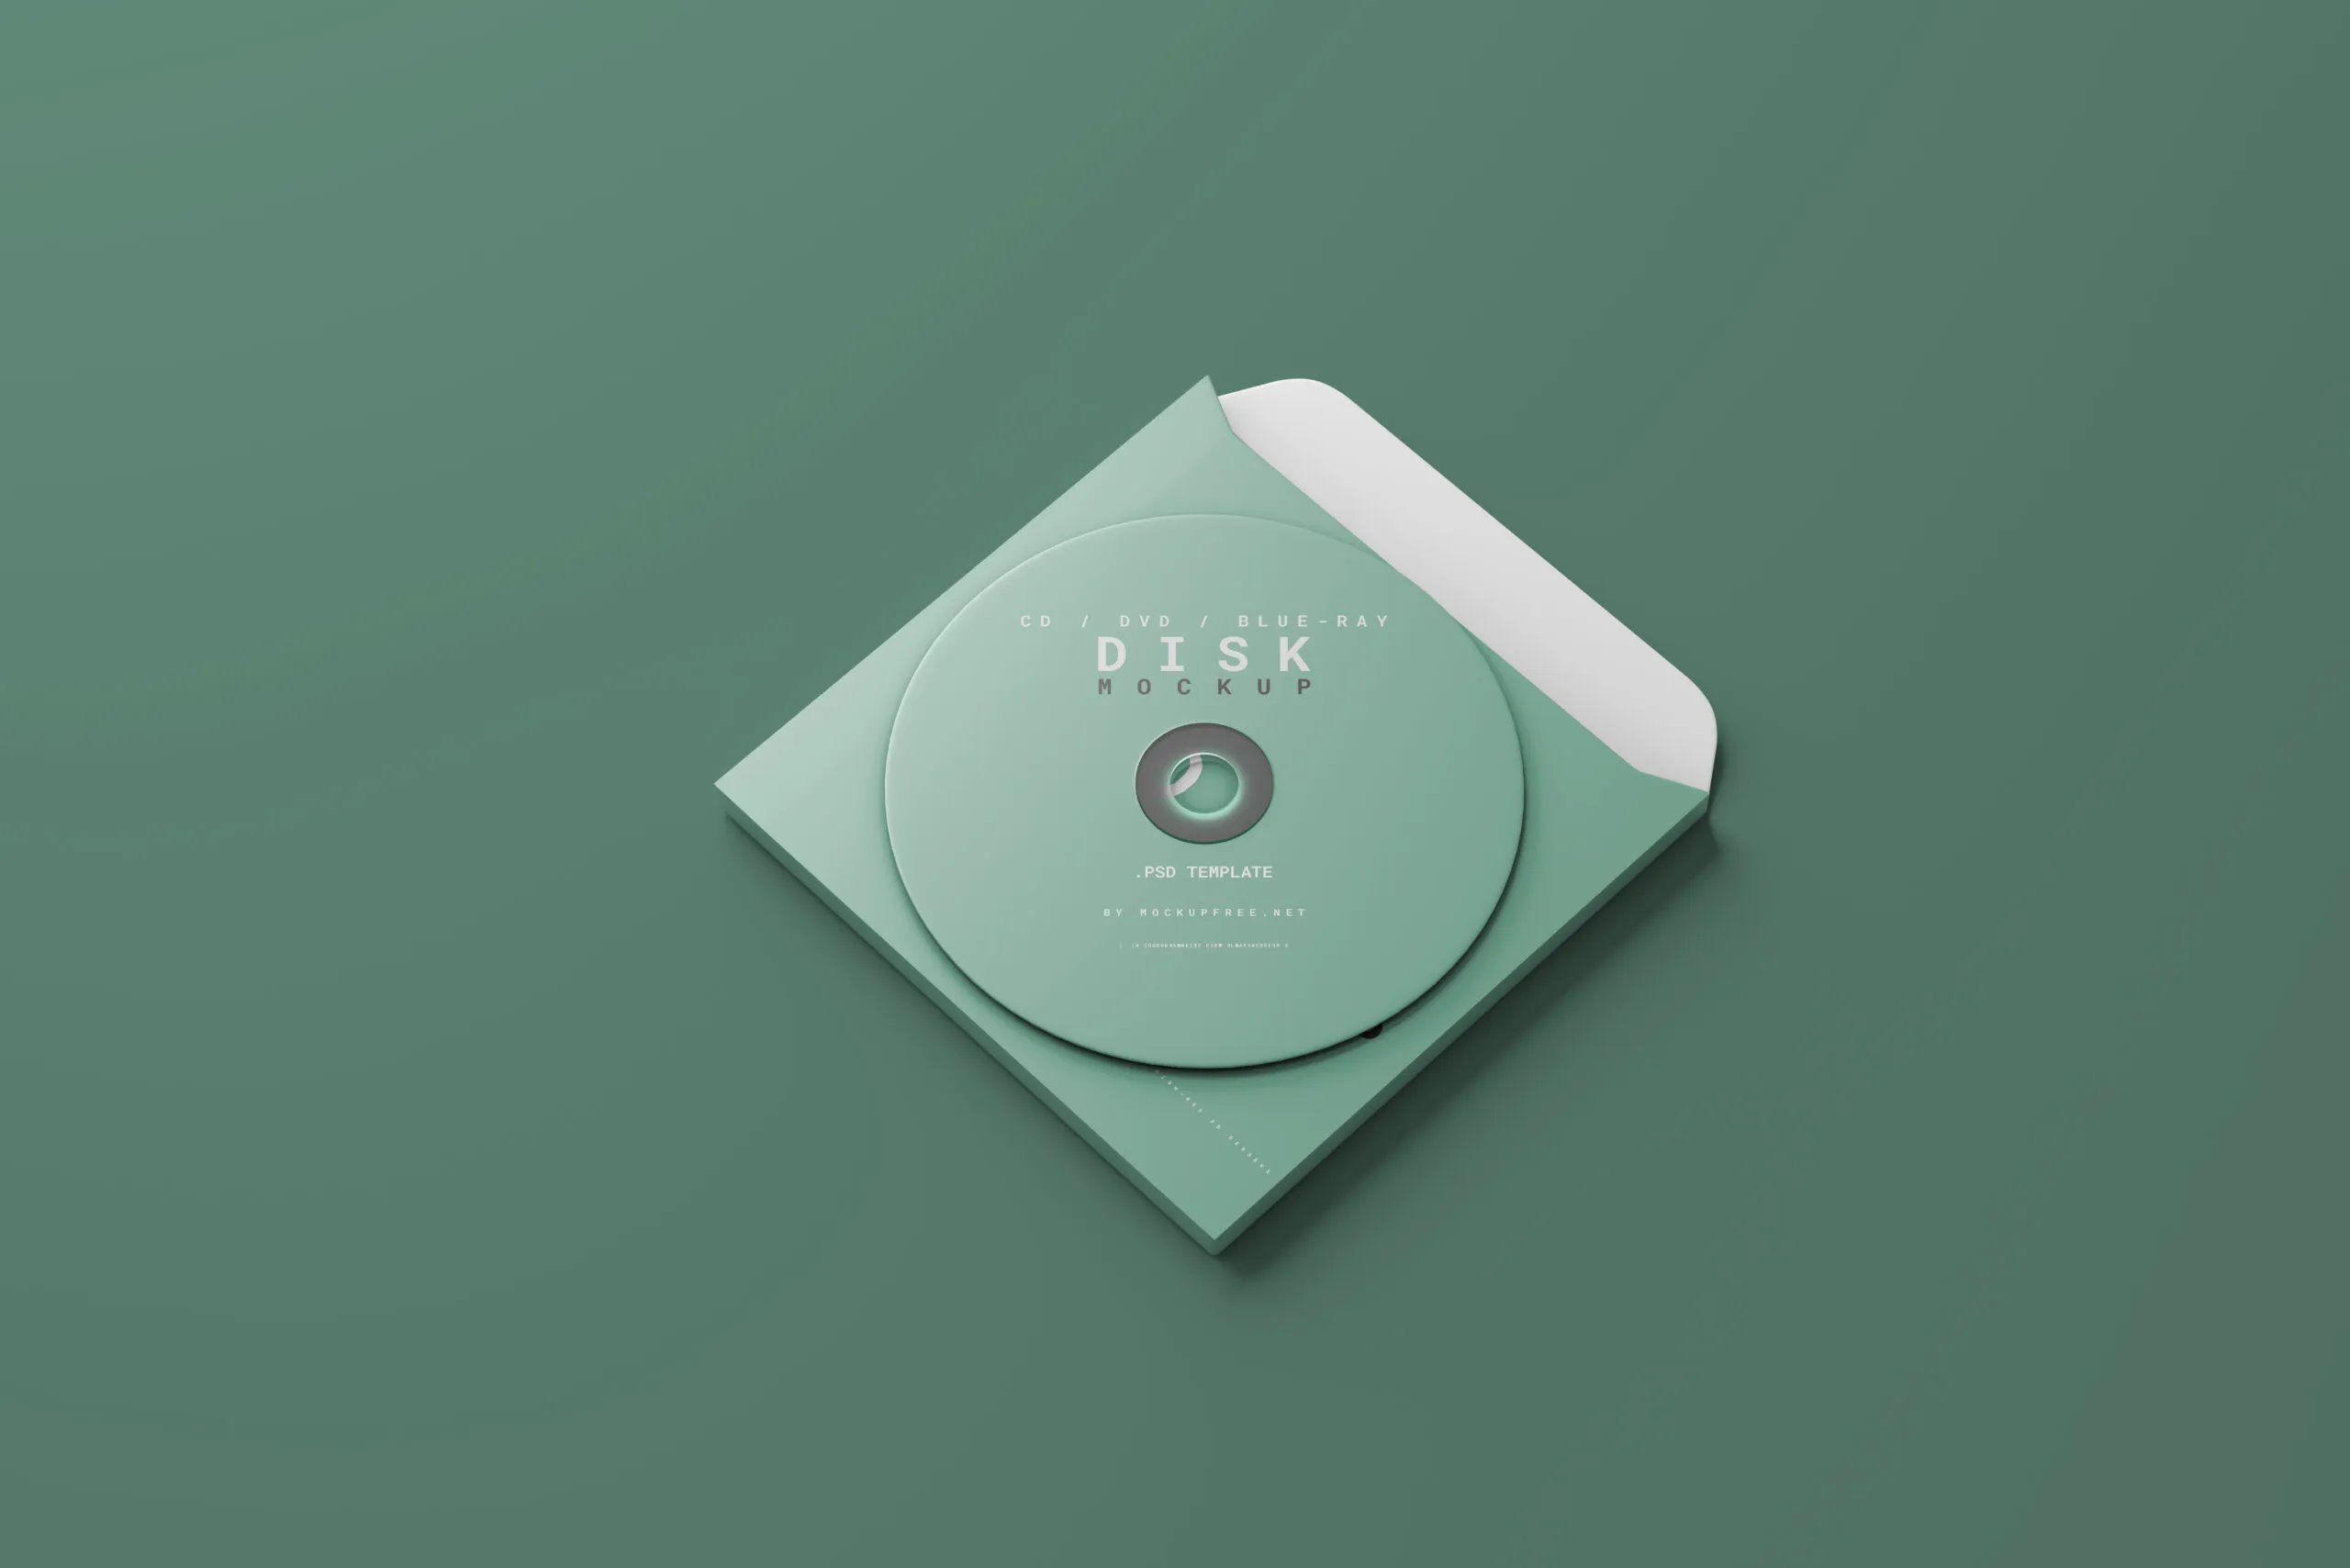 5 Disc Mockups with Box Packaging in Various Sights FREE PSD